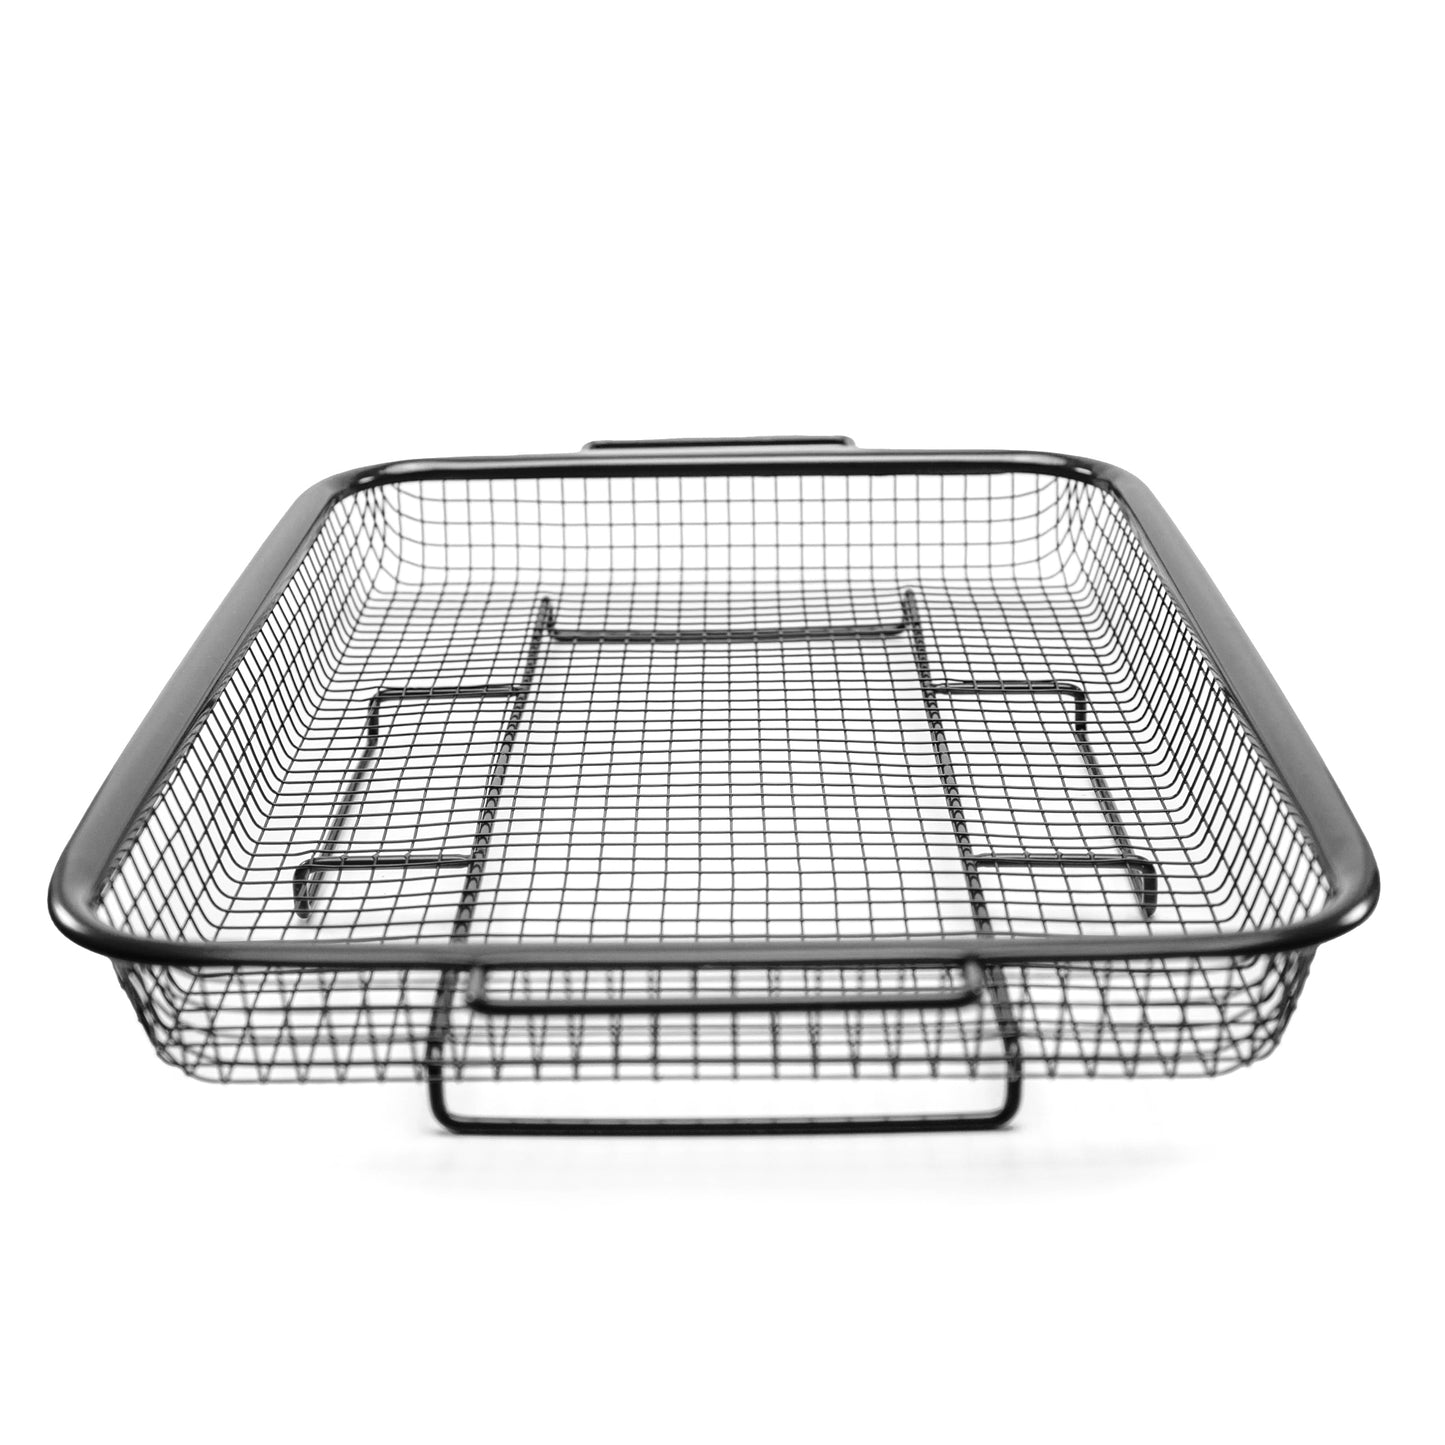 DiamoTech 2-Piece Crisping Baskets Oven & Air Fry Crisper Basket Nesting Set Toxin-Free Non-Stick  Healthy Cooking 9"x 13" Gray